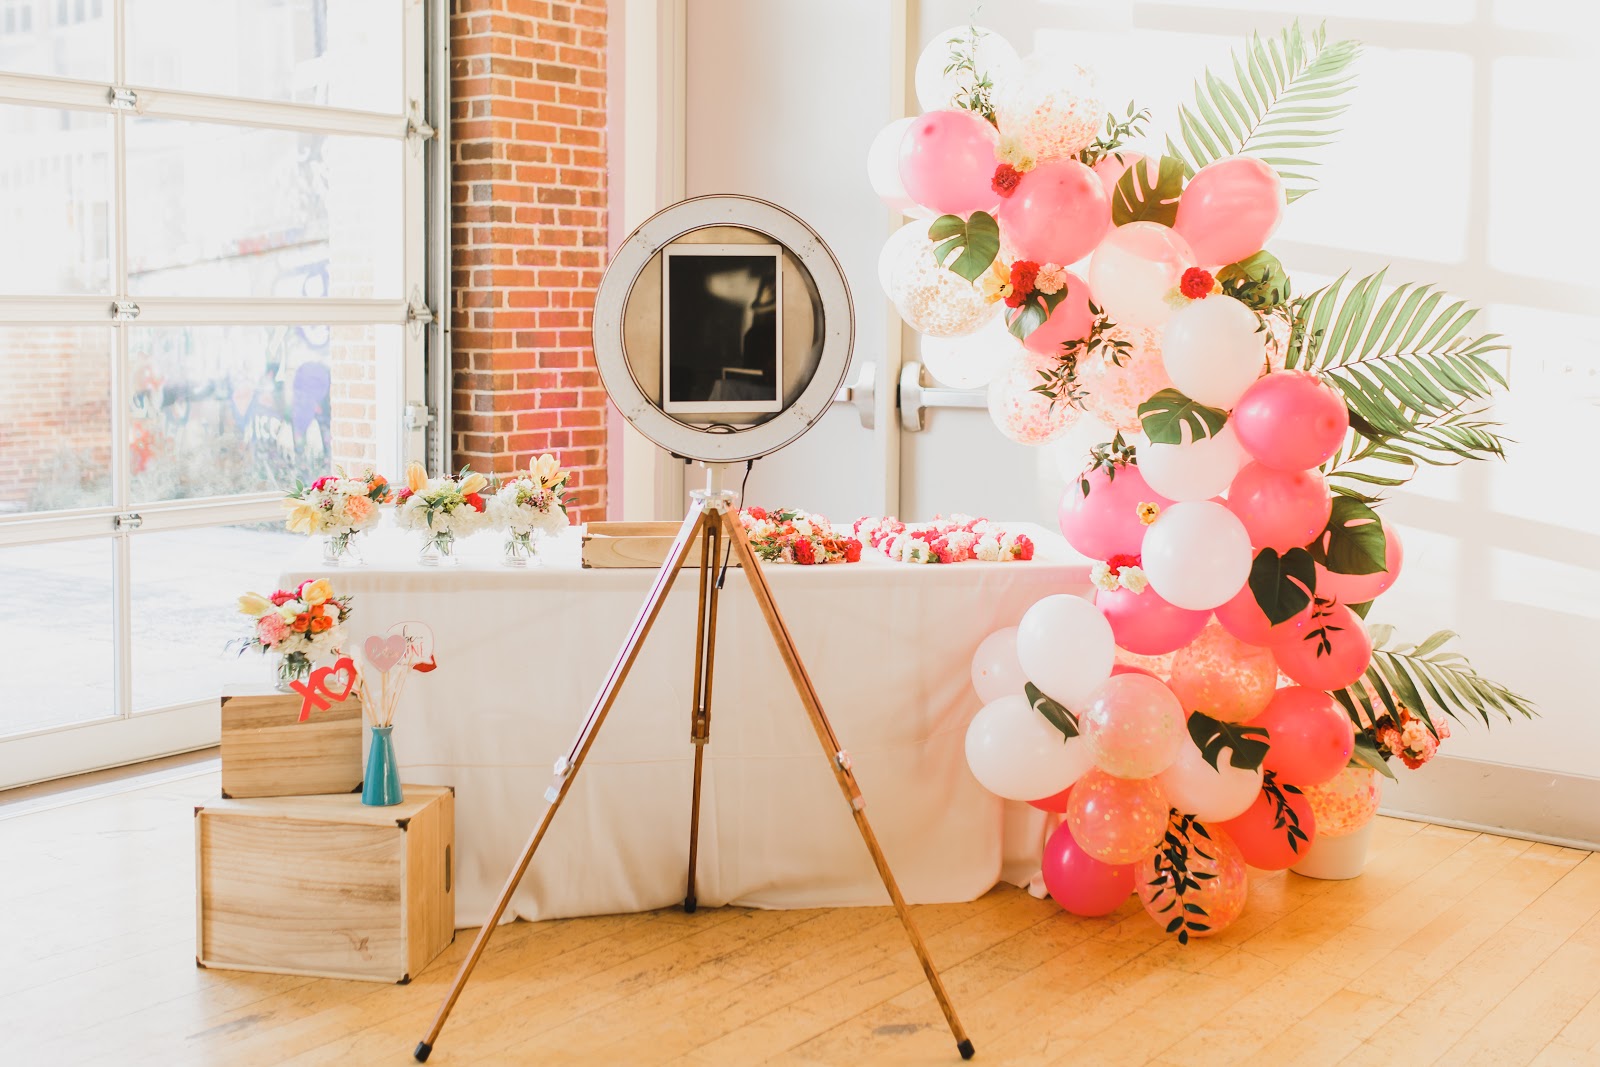 8 Questions to Ask When Choosing a Photo Booth Company for Your Wedding